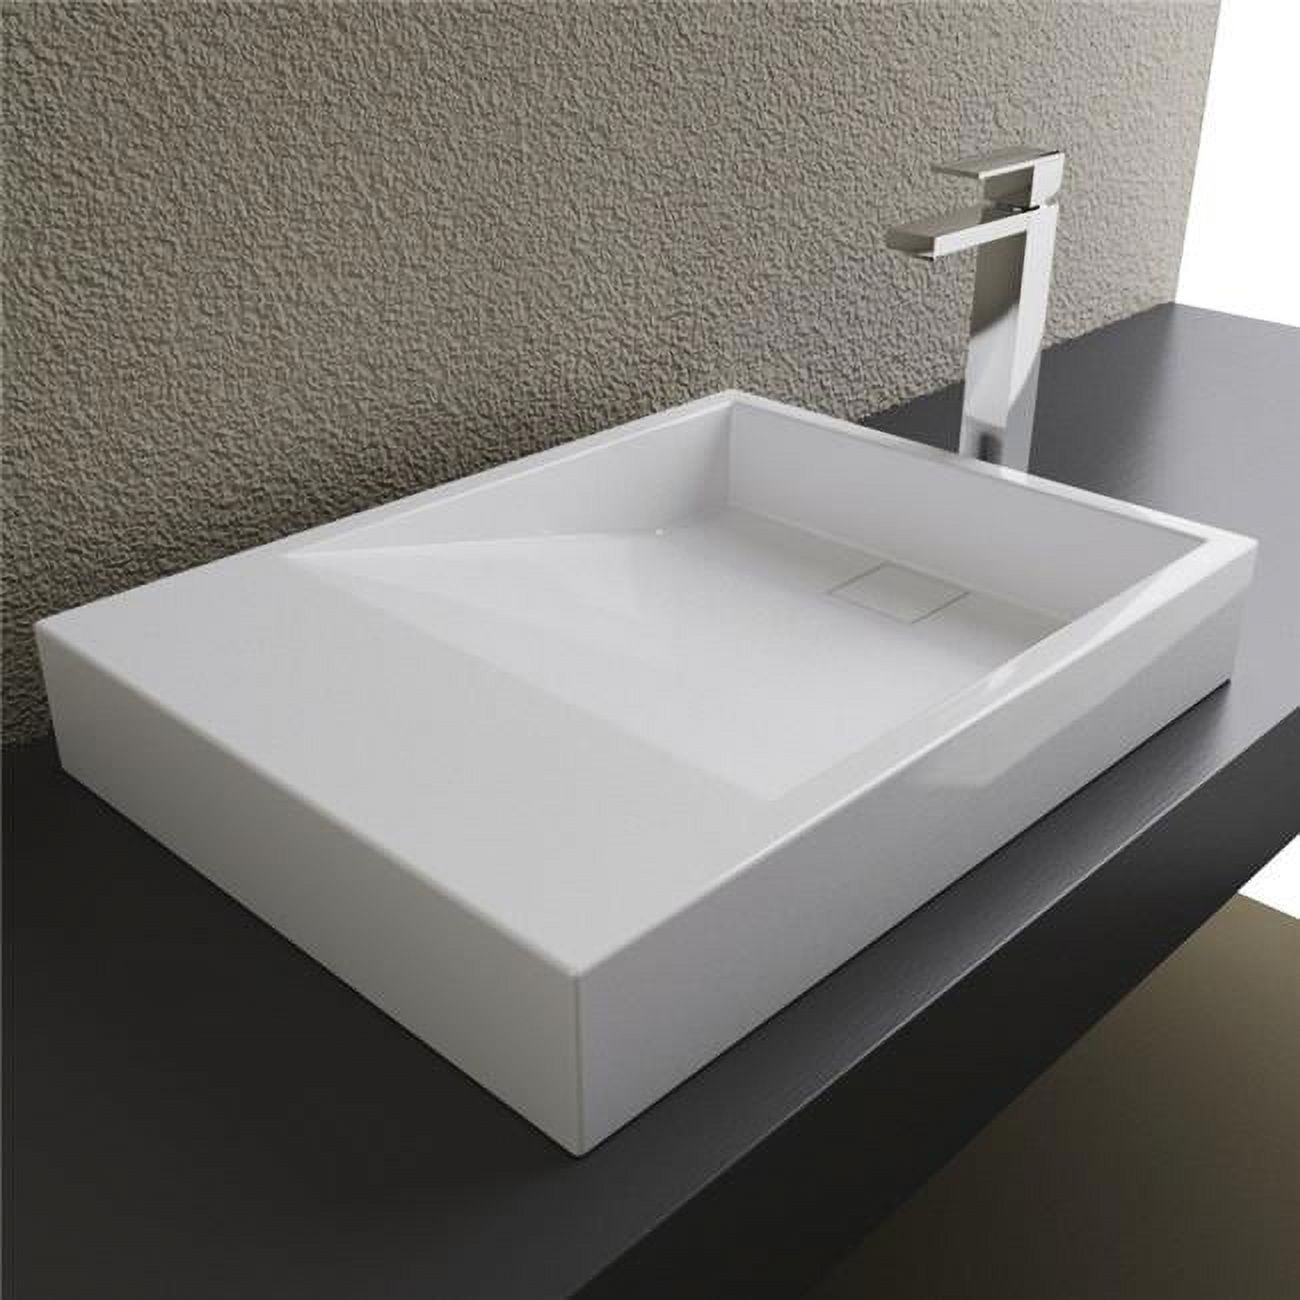 St-24184 Solid Surface Above Counter Sink, White